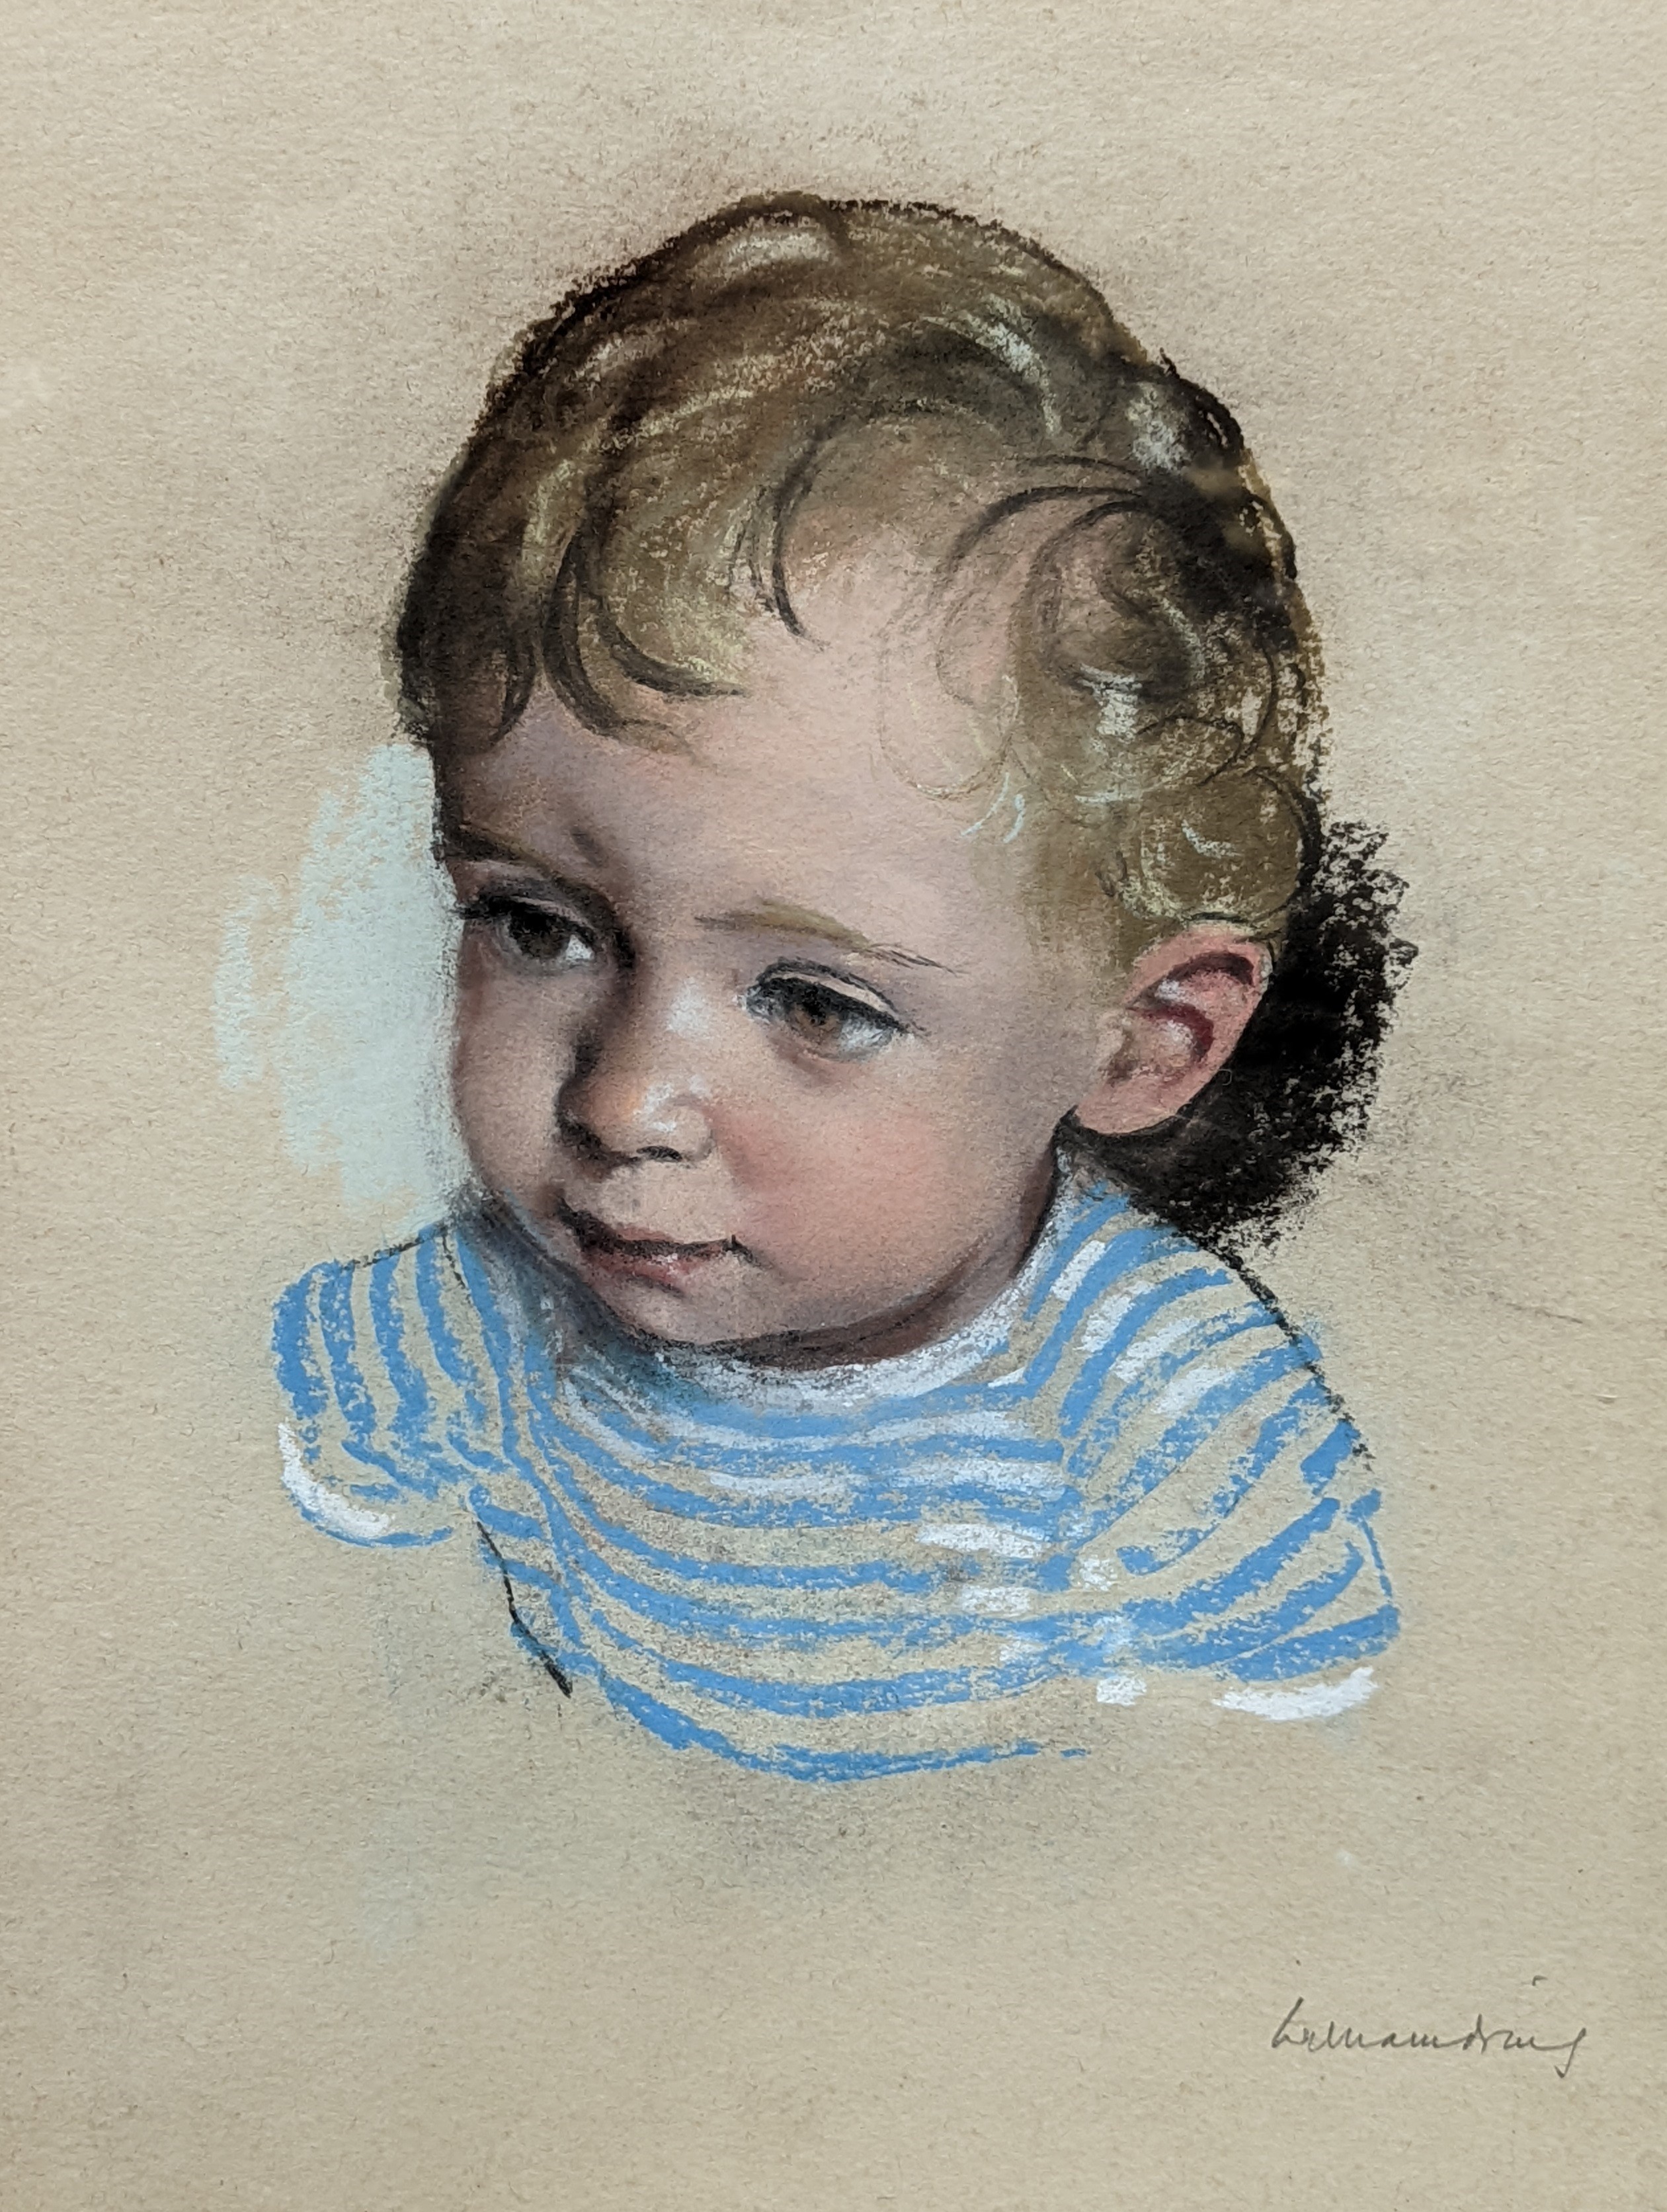 William Dring, pastel on paper, Portrait of a young boy 38x29cm